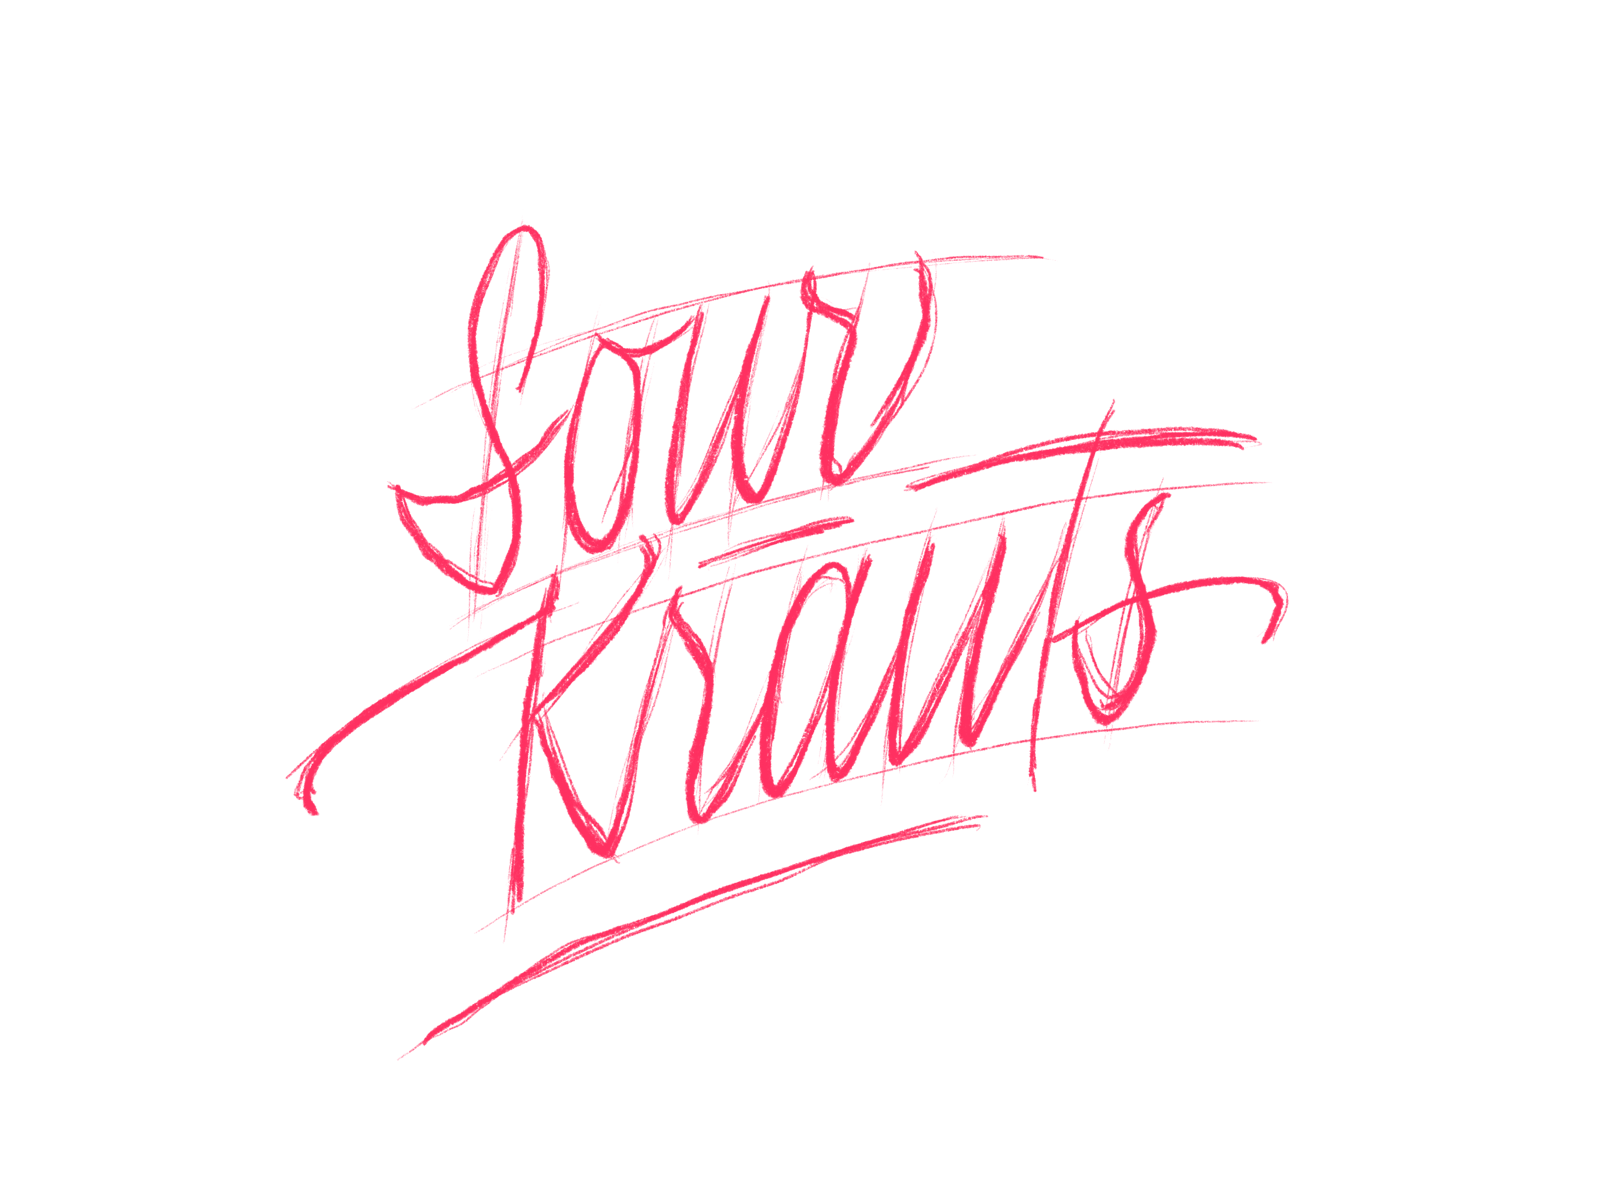 Lettering print for “Automotive Fashion Brand - Sourkrauts” calligraphy lettering print print design printing printmaking typography